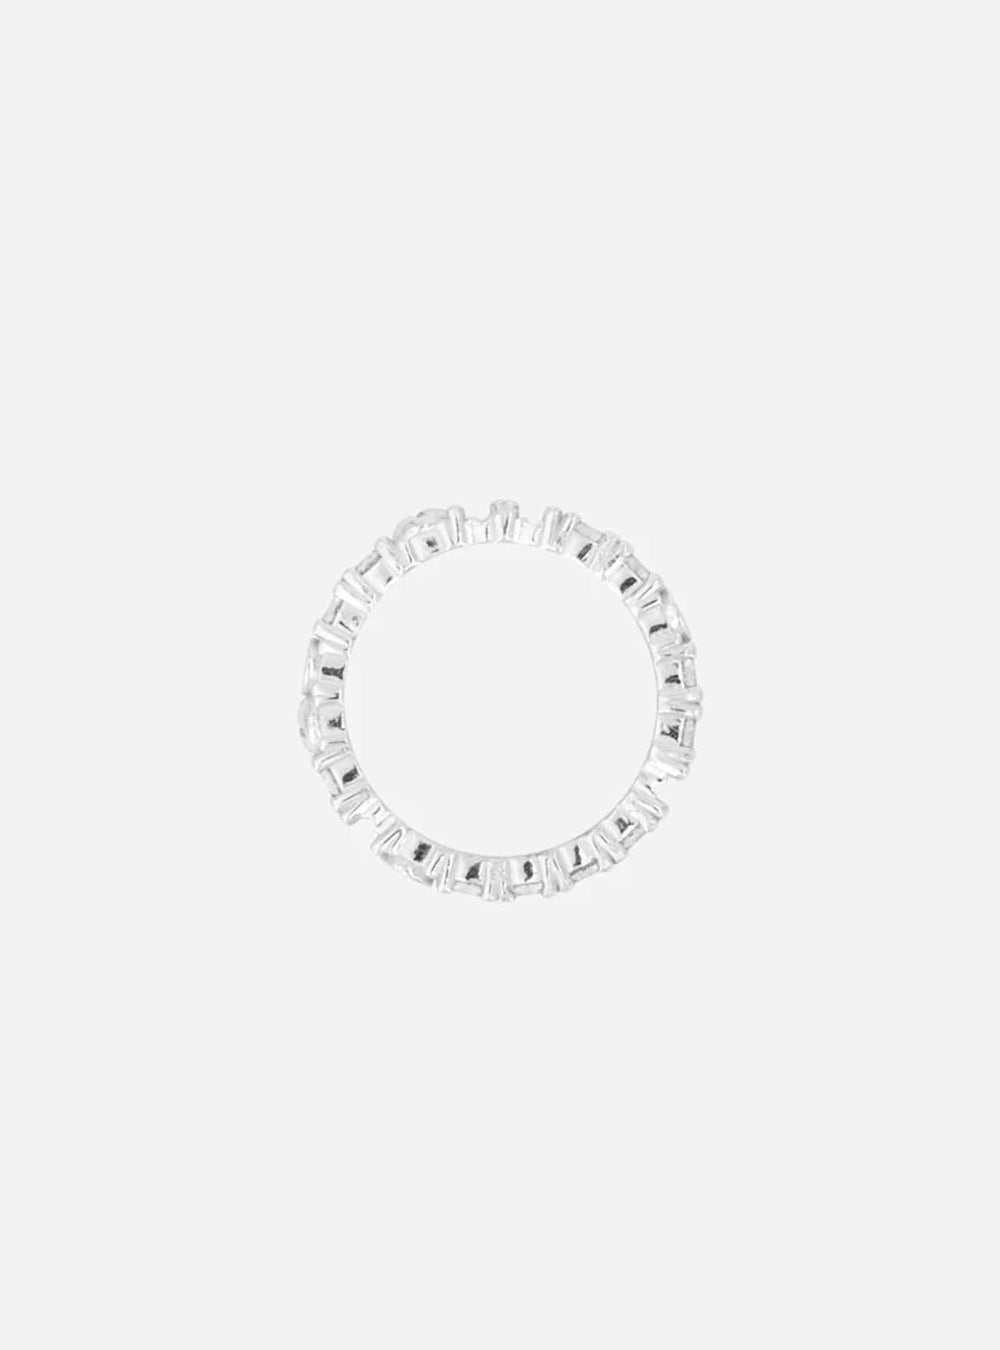 A "MIDNIGHTFACTORY Broken eternity ring with topaz" on a white background.